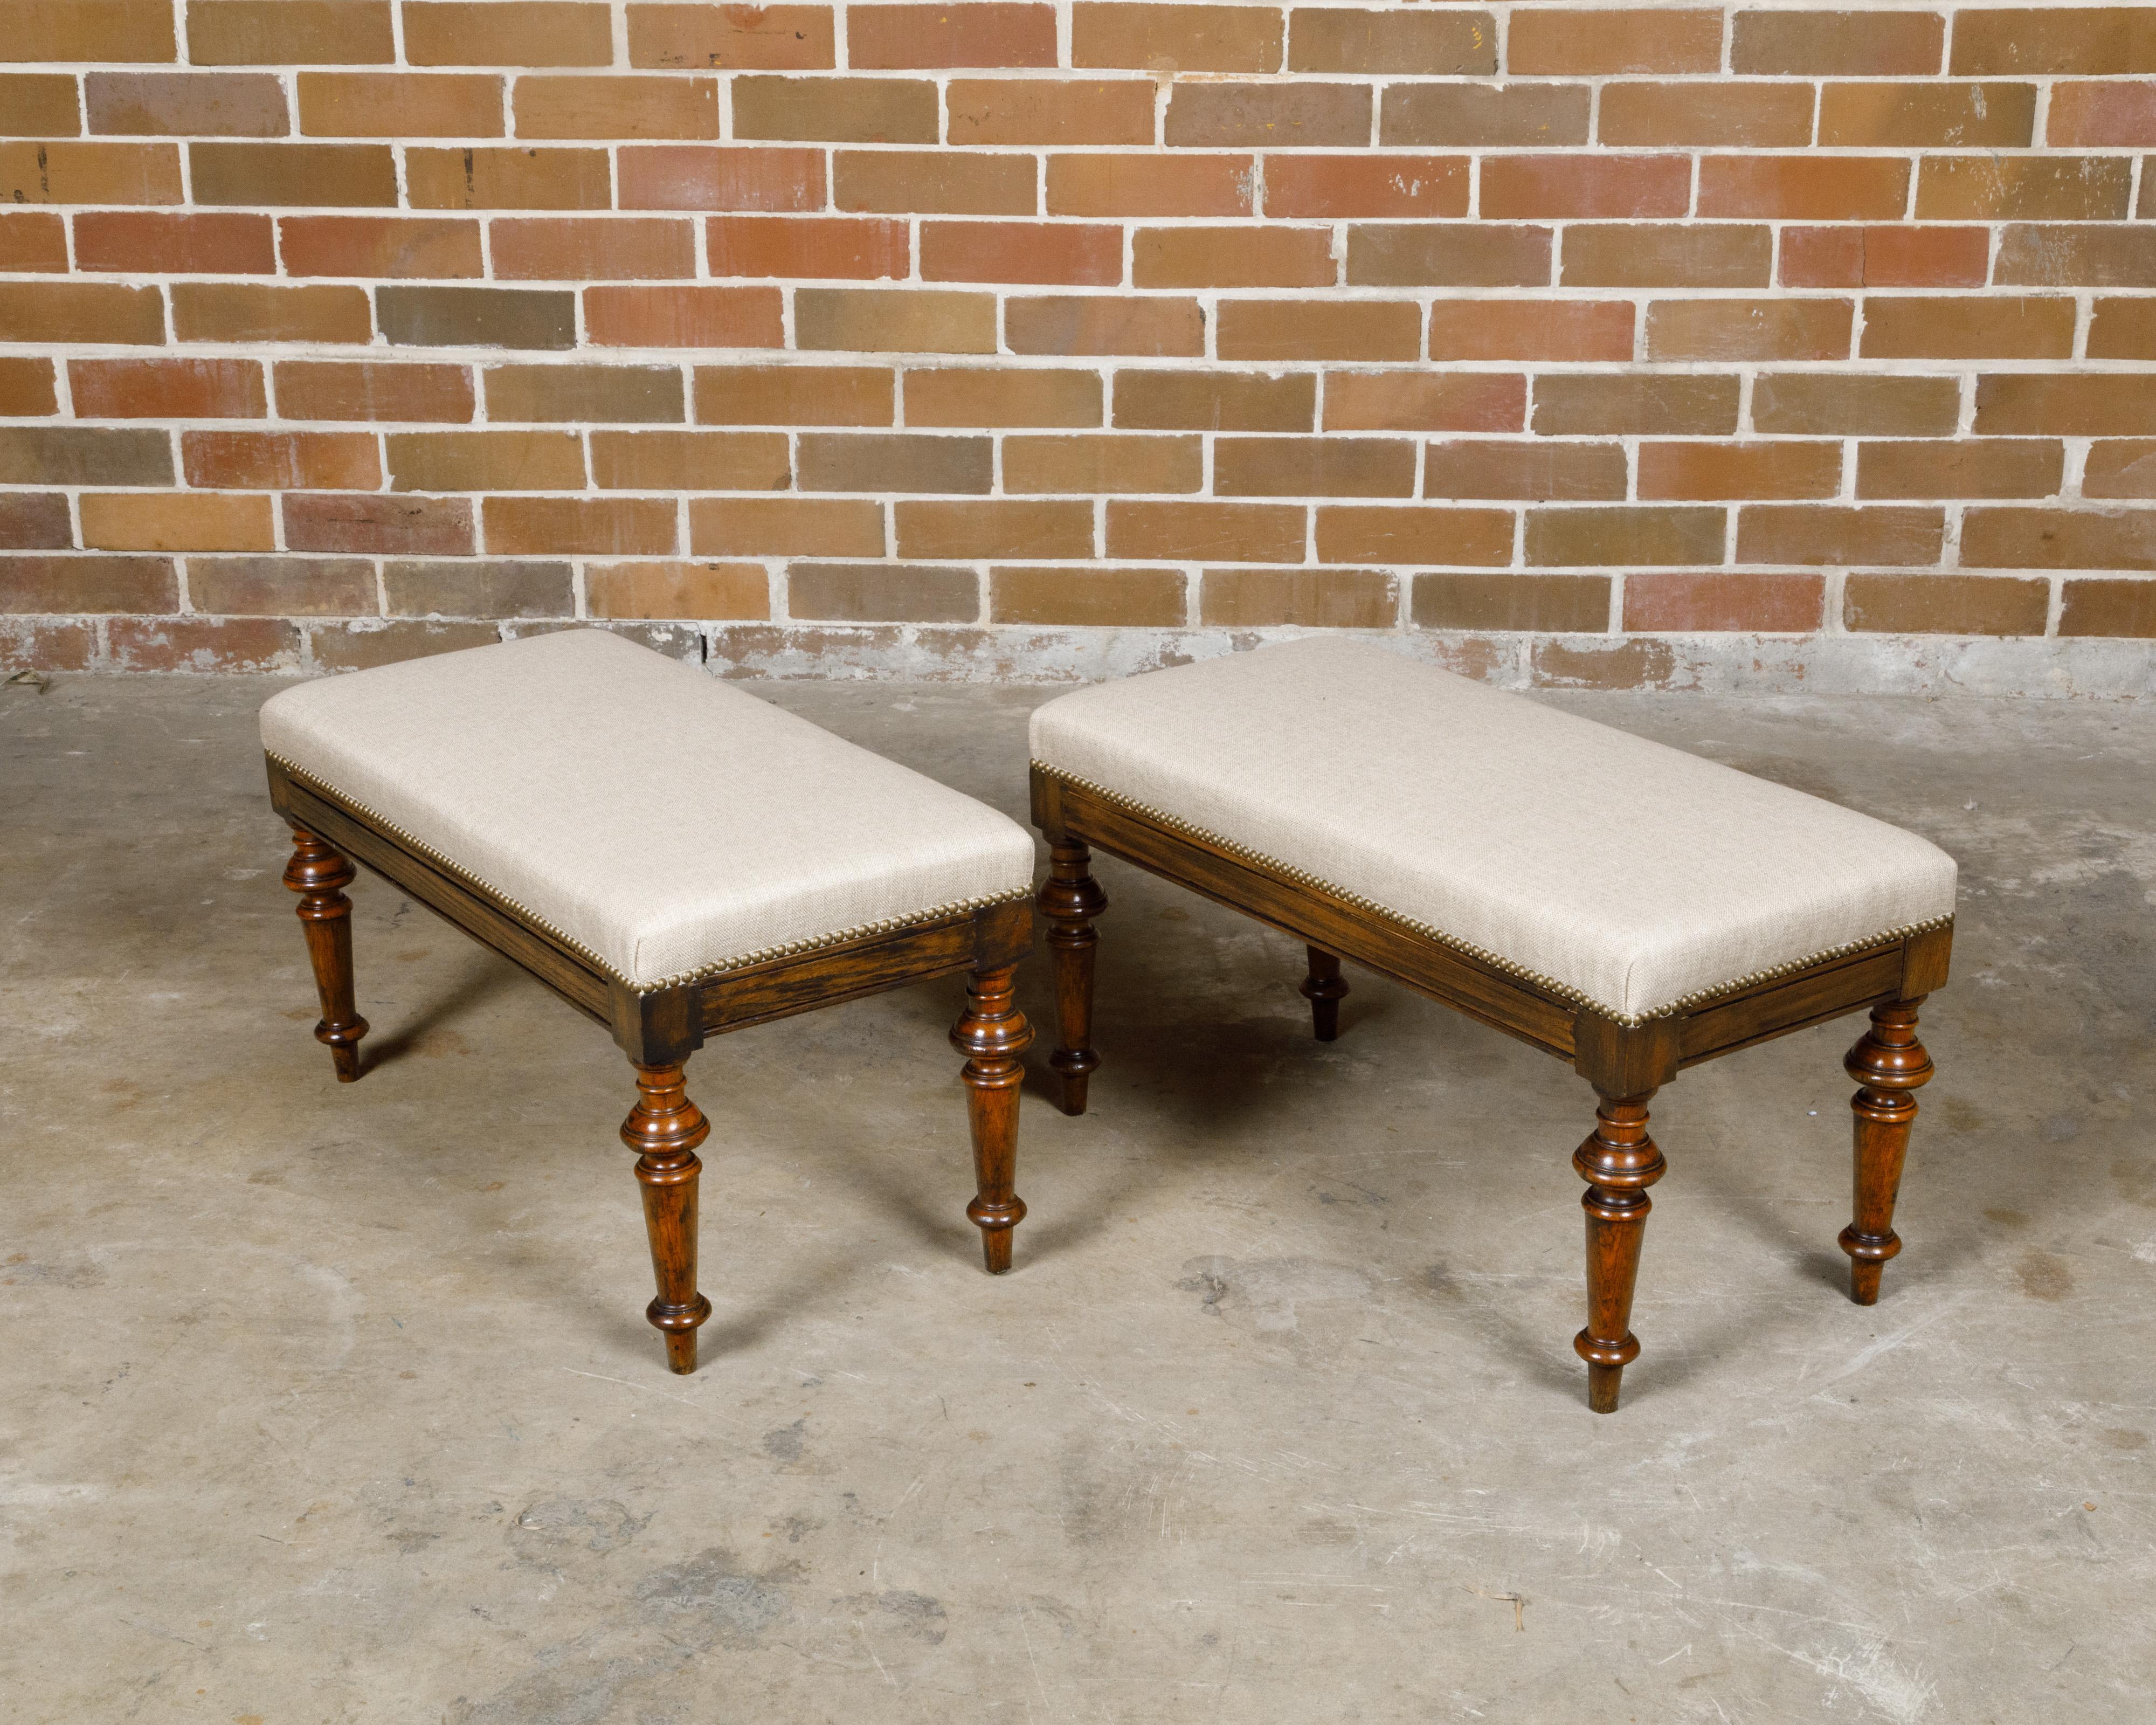 Pair of English 19th Century Oak Stools with Turned Legs and Custom Upholstery For Sale 8